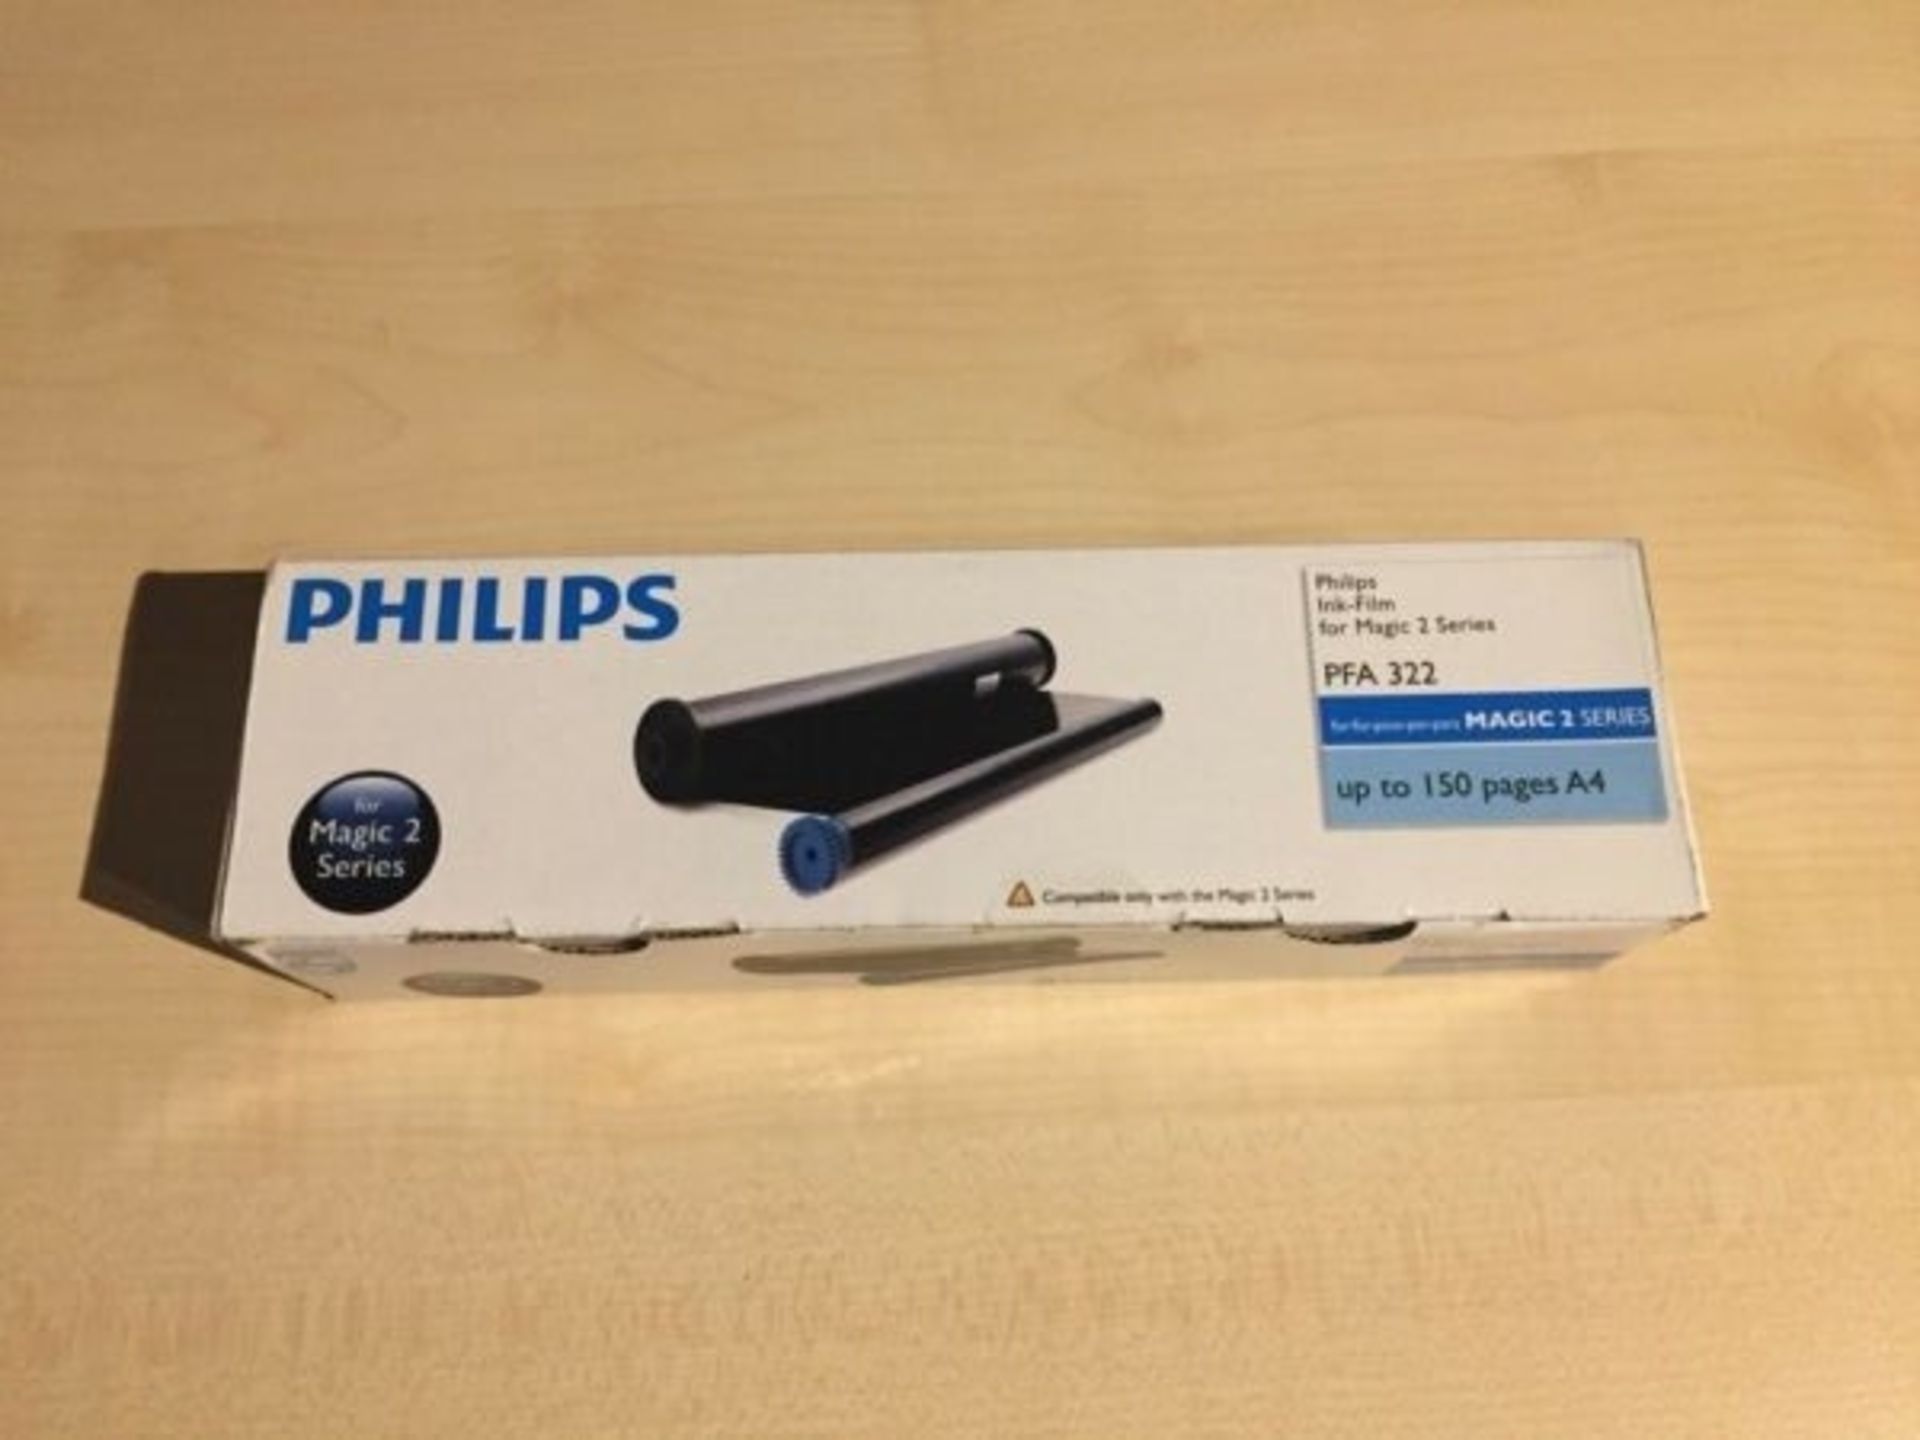 2 AS NEW BOXED PHILIPS INK-FILM FOR MAGIC SERIES 2 PFA 322 (P/N - 104) / RRP £89.99 (VIEWING